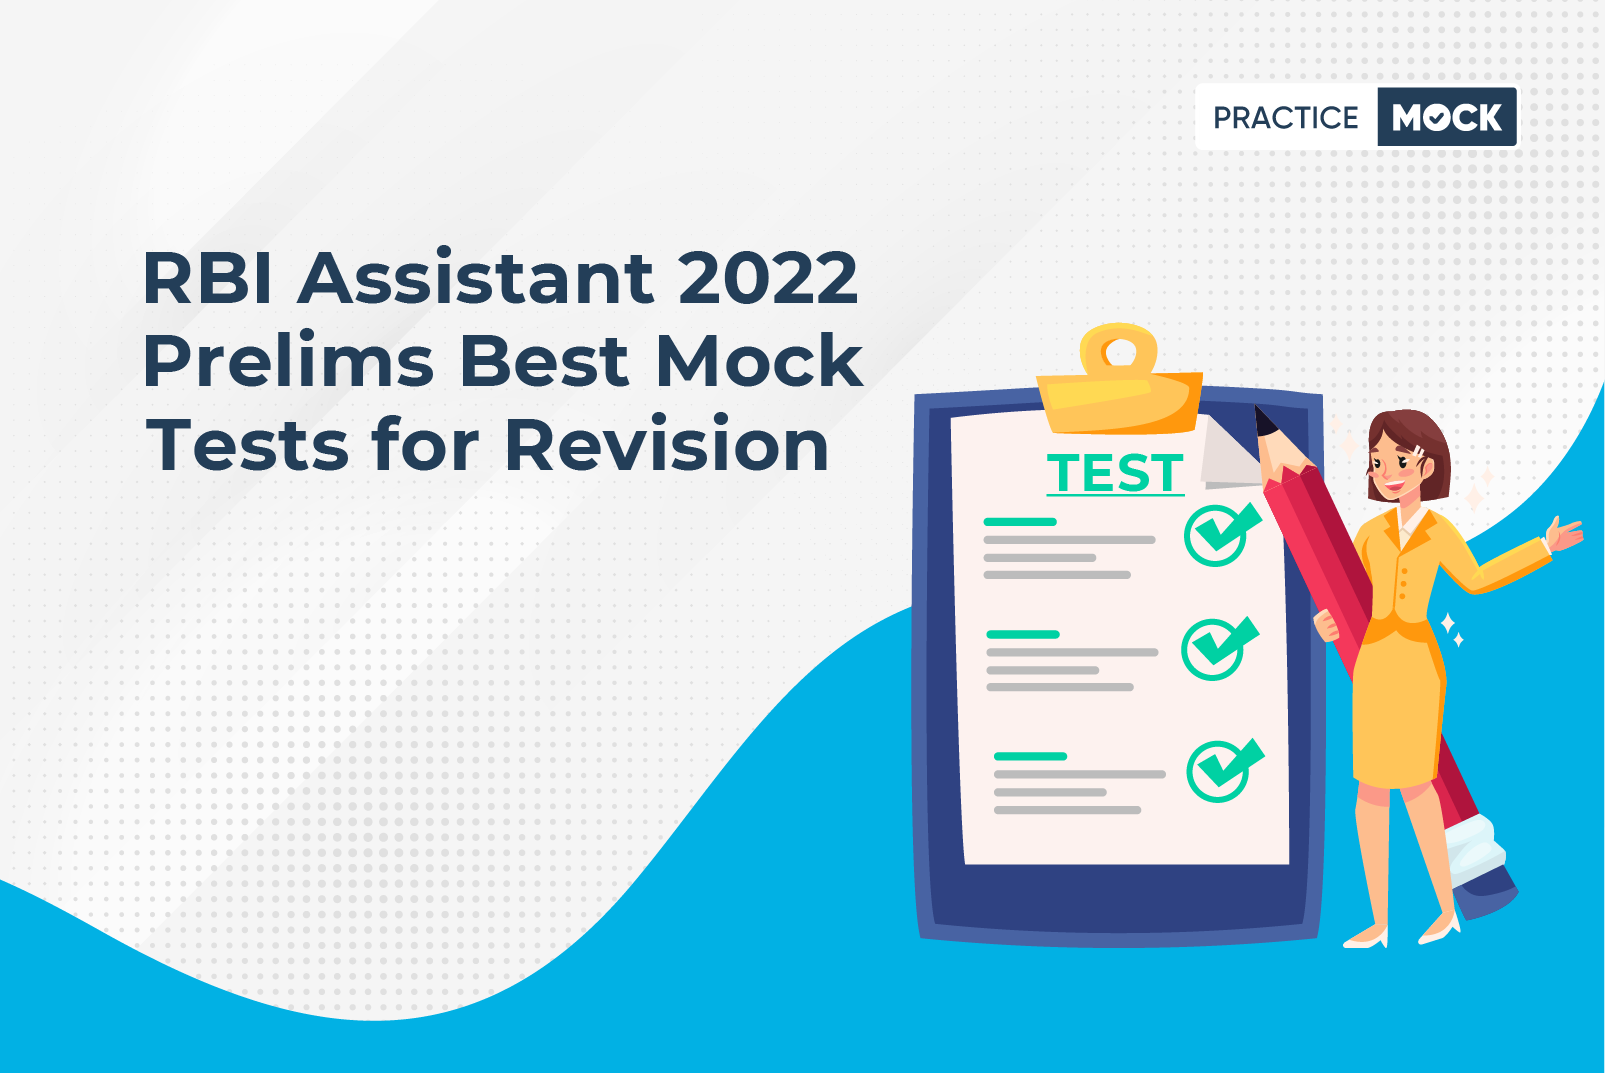 RBI Assistant Prelims Exam 2022- Last Mock Tests for Perfect Revision